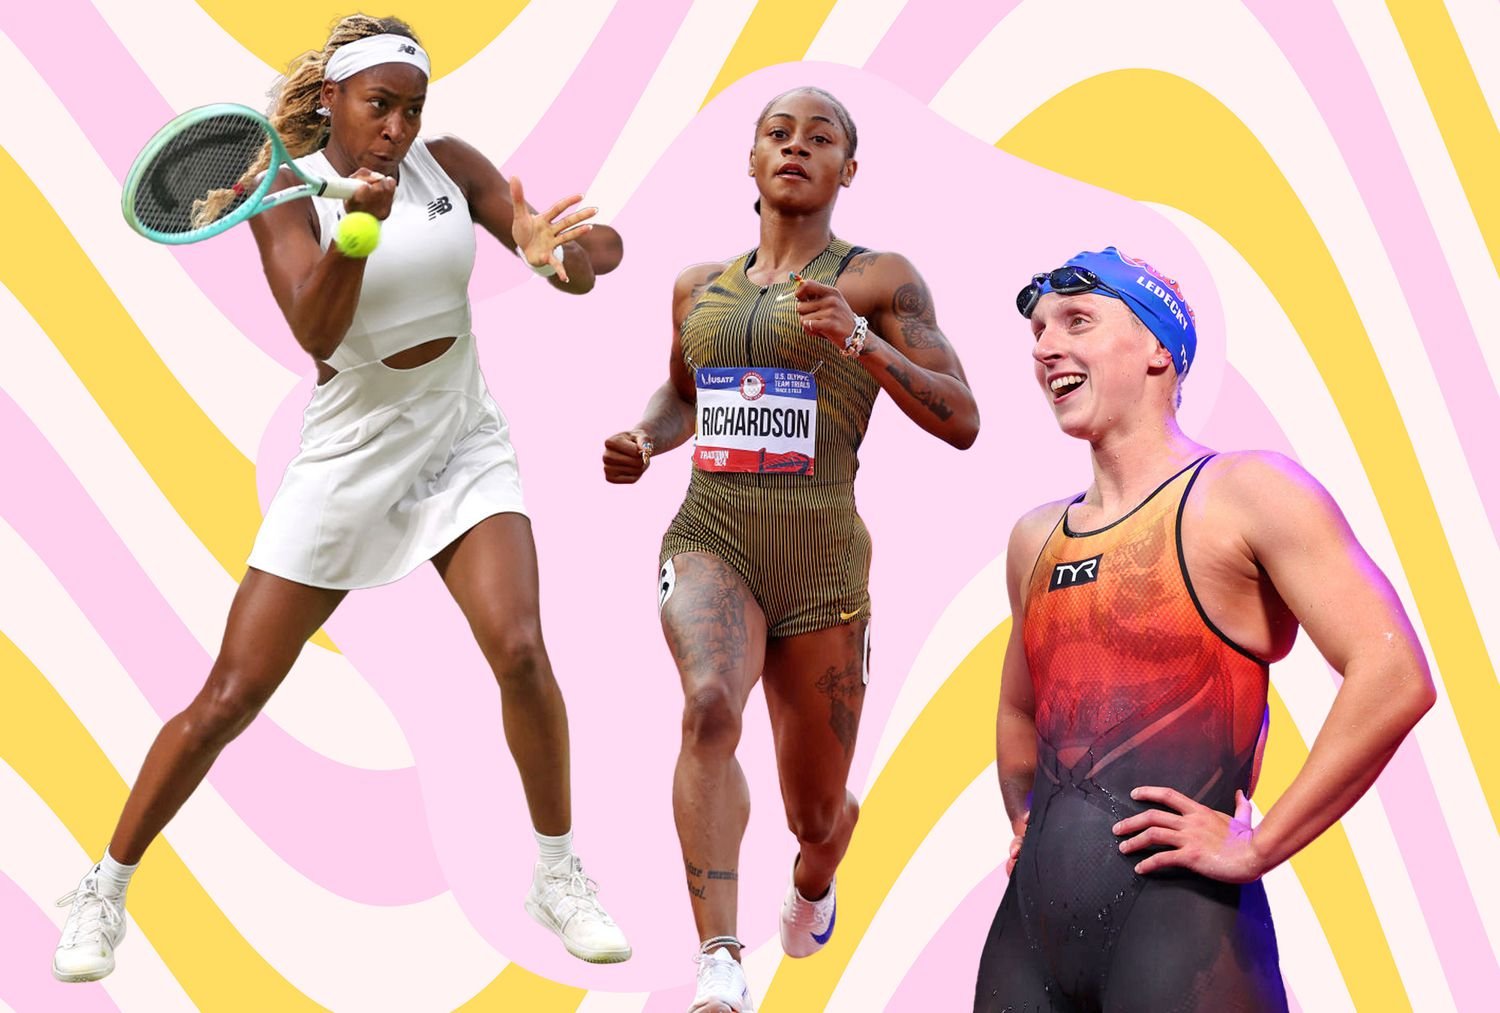 I interviewed 10 Olympians. Here are 5 healthy habits they do every day